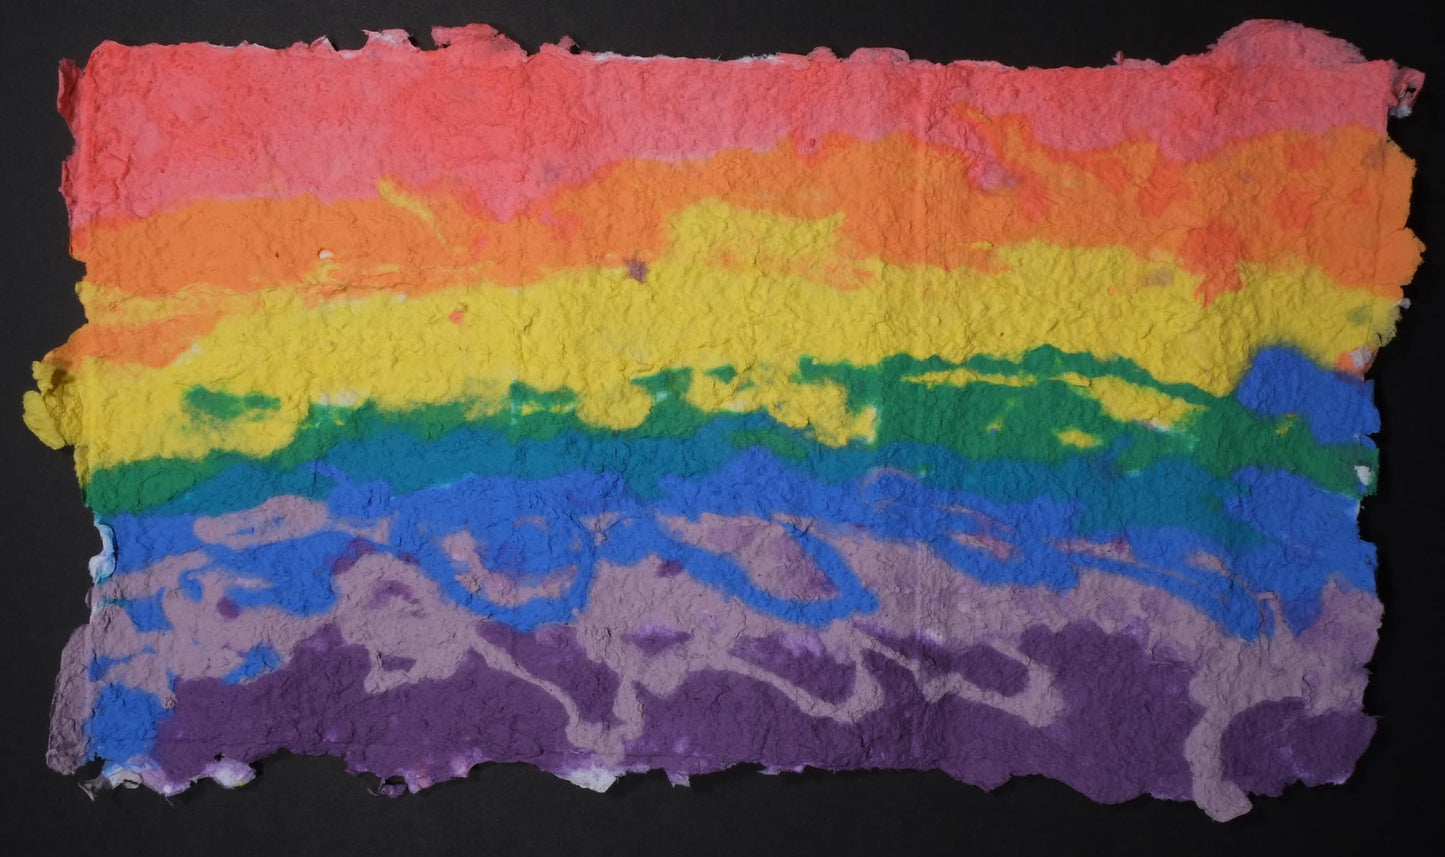 Highly textured handmade paper with horizontal lines of color (starting at the top) red, orange, yellow, green, blue, light purple, and dark purple.